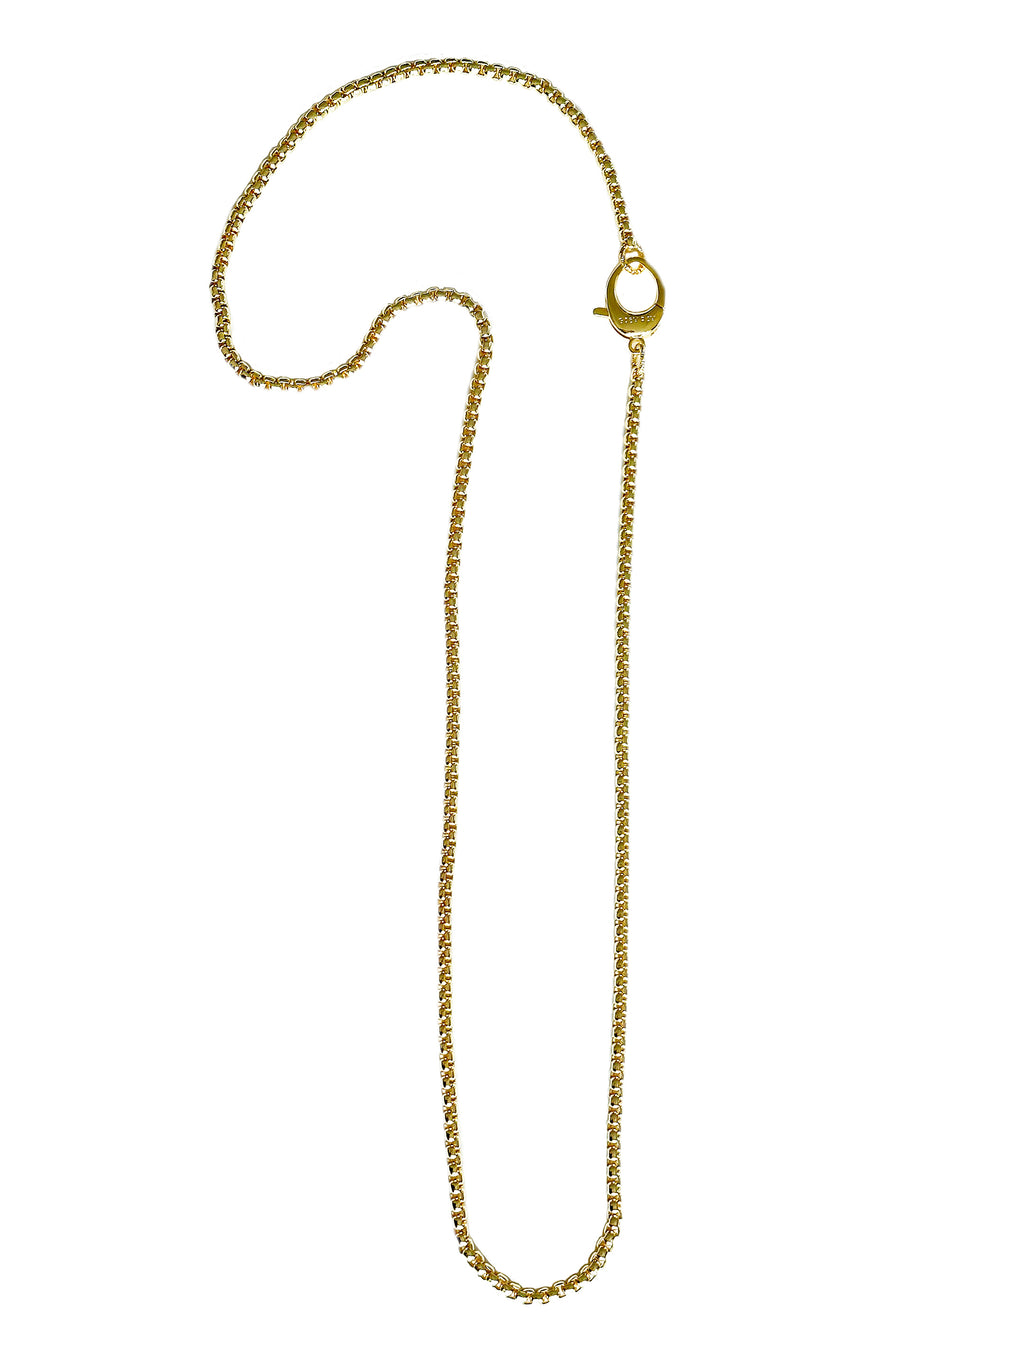 Brooke gold long statement necklace